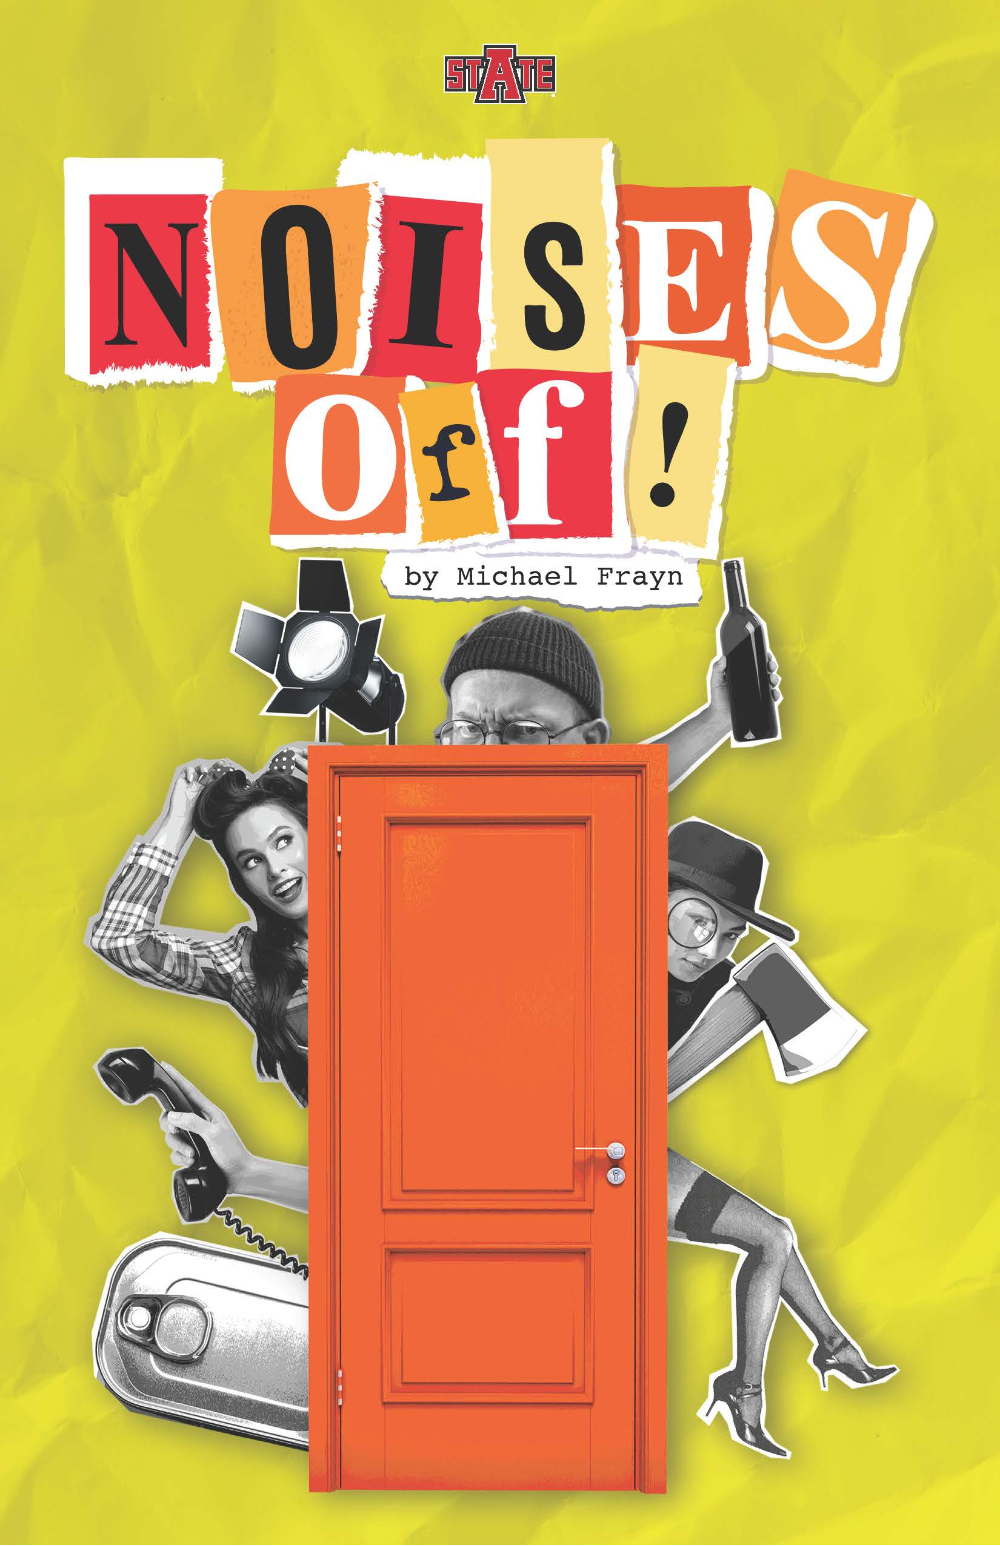 A-State Theatre to Open Production of ‘Noises Off!’ Friday